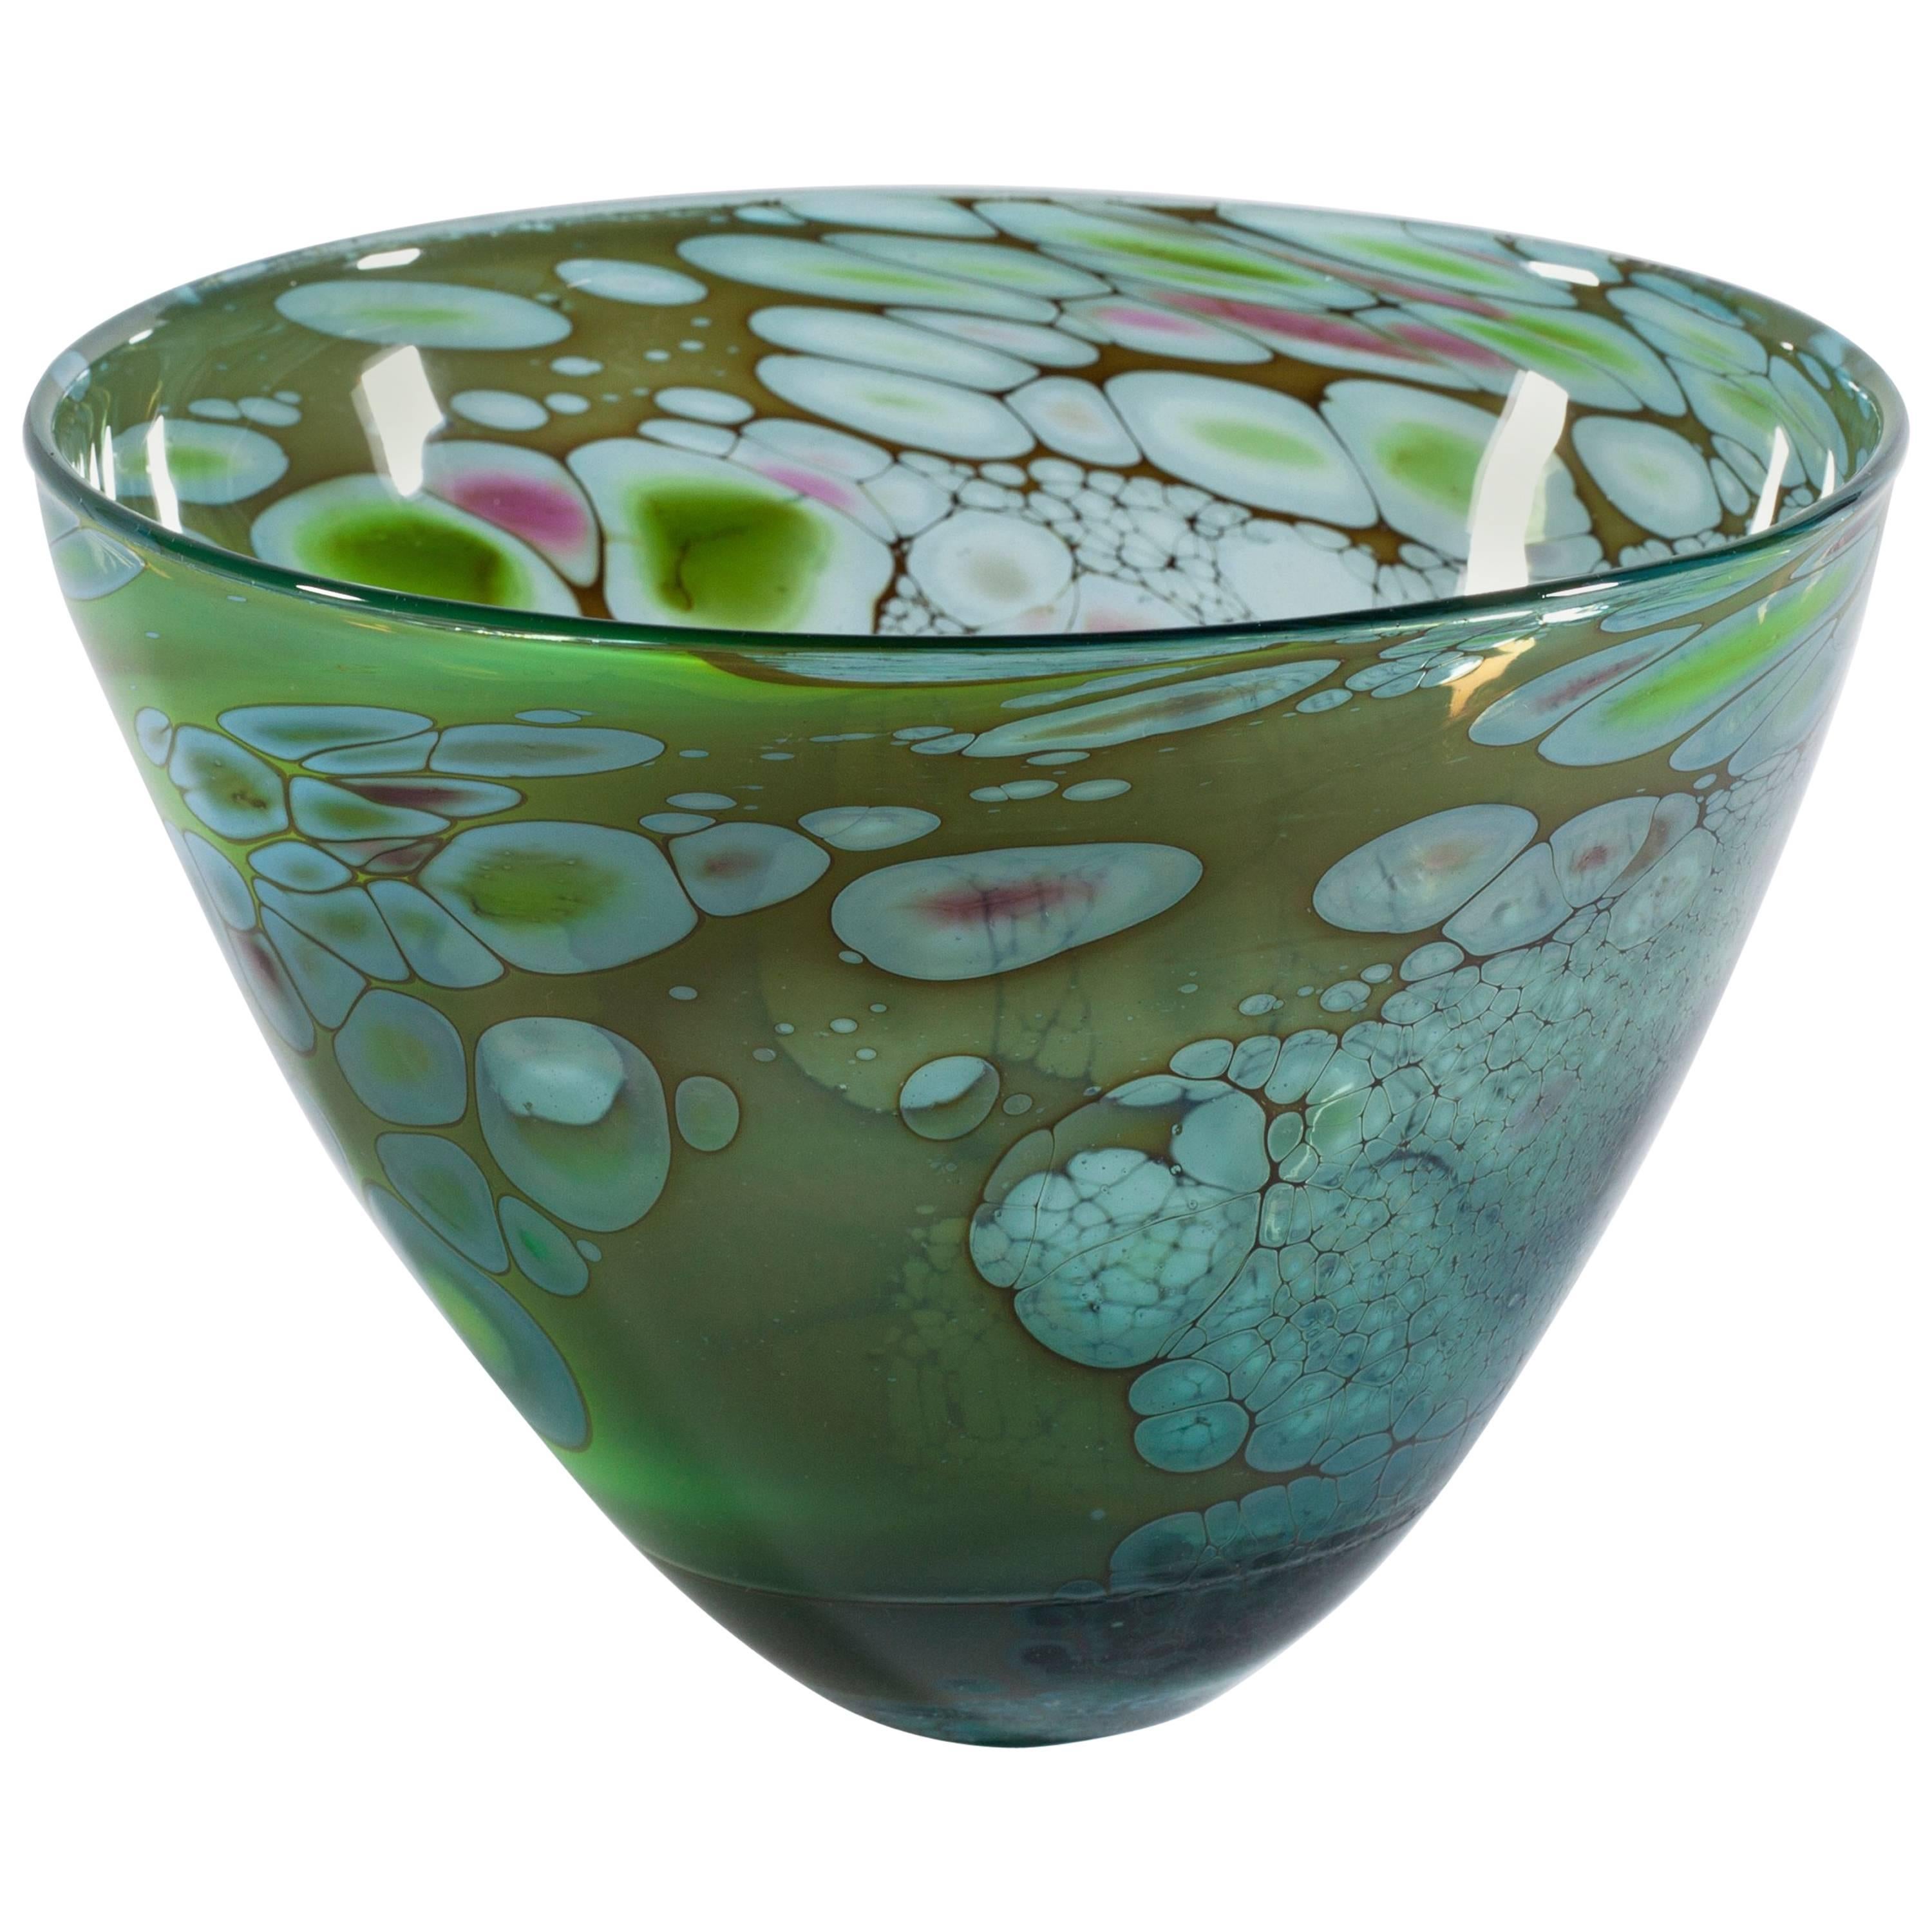 Unique Art Glass Bowl by Willem Heese, Executed by De Oude Horn